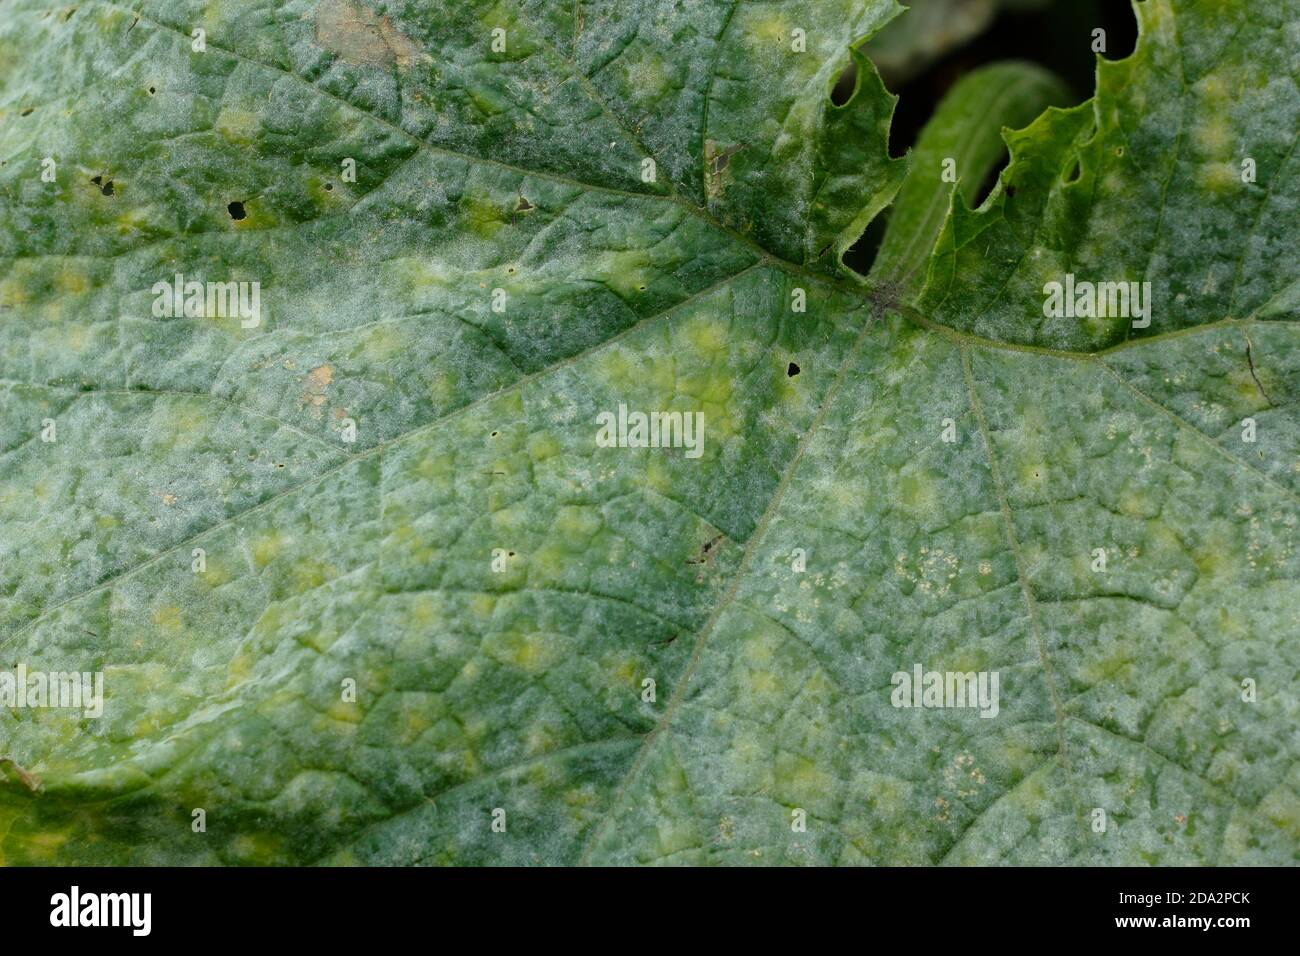 Cucurbita pepo.  Powdery mildew fungal disease on the leaves of a  courgette plant. UK Stock Photo